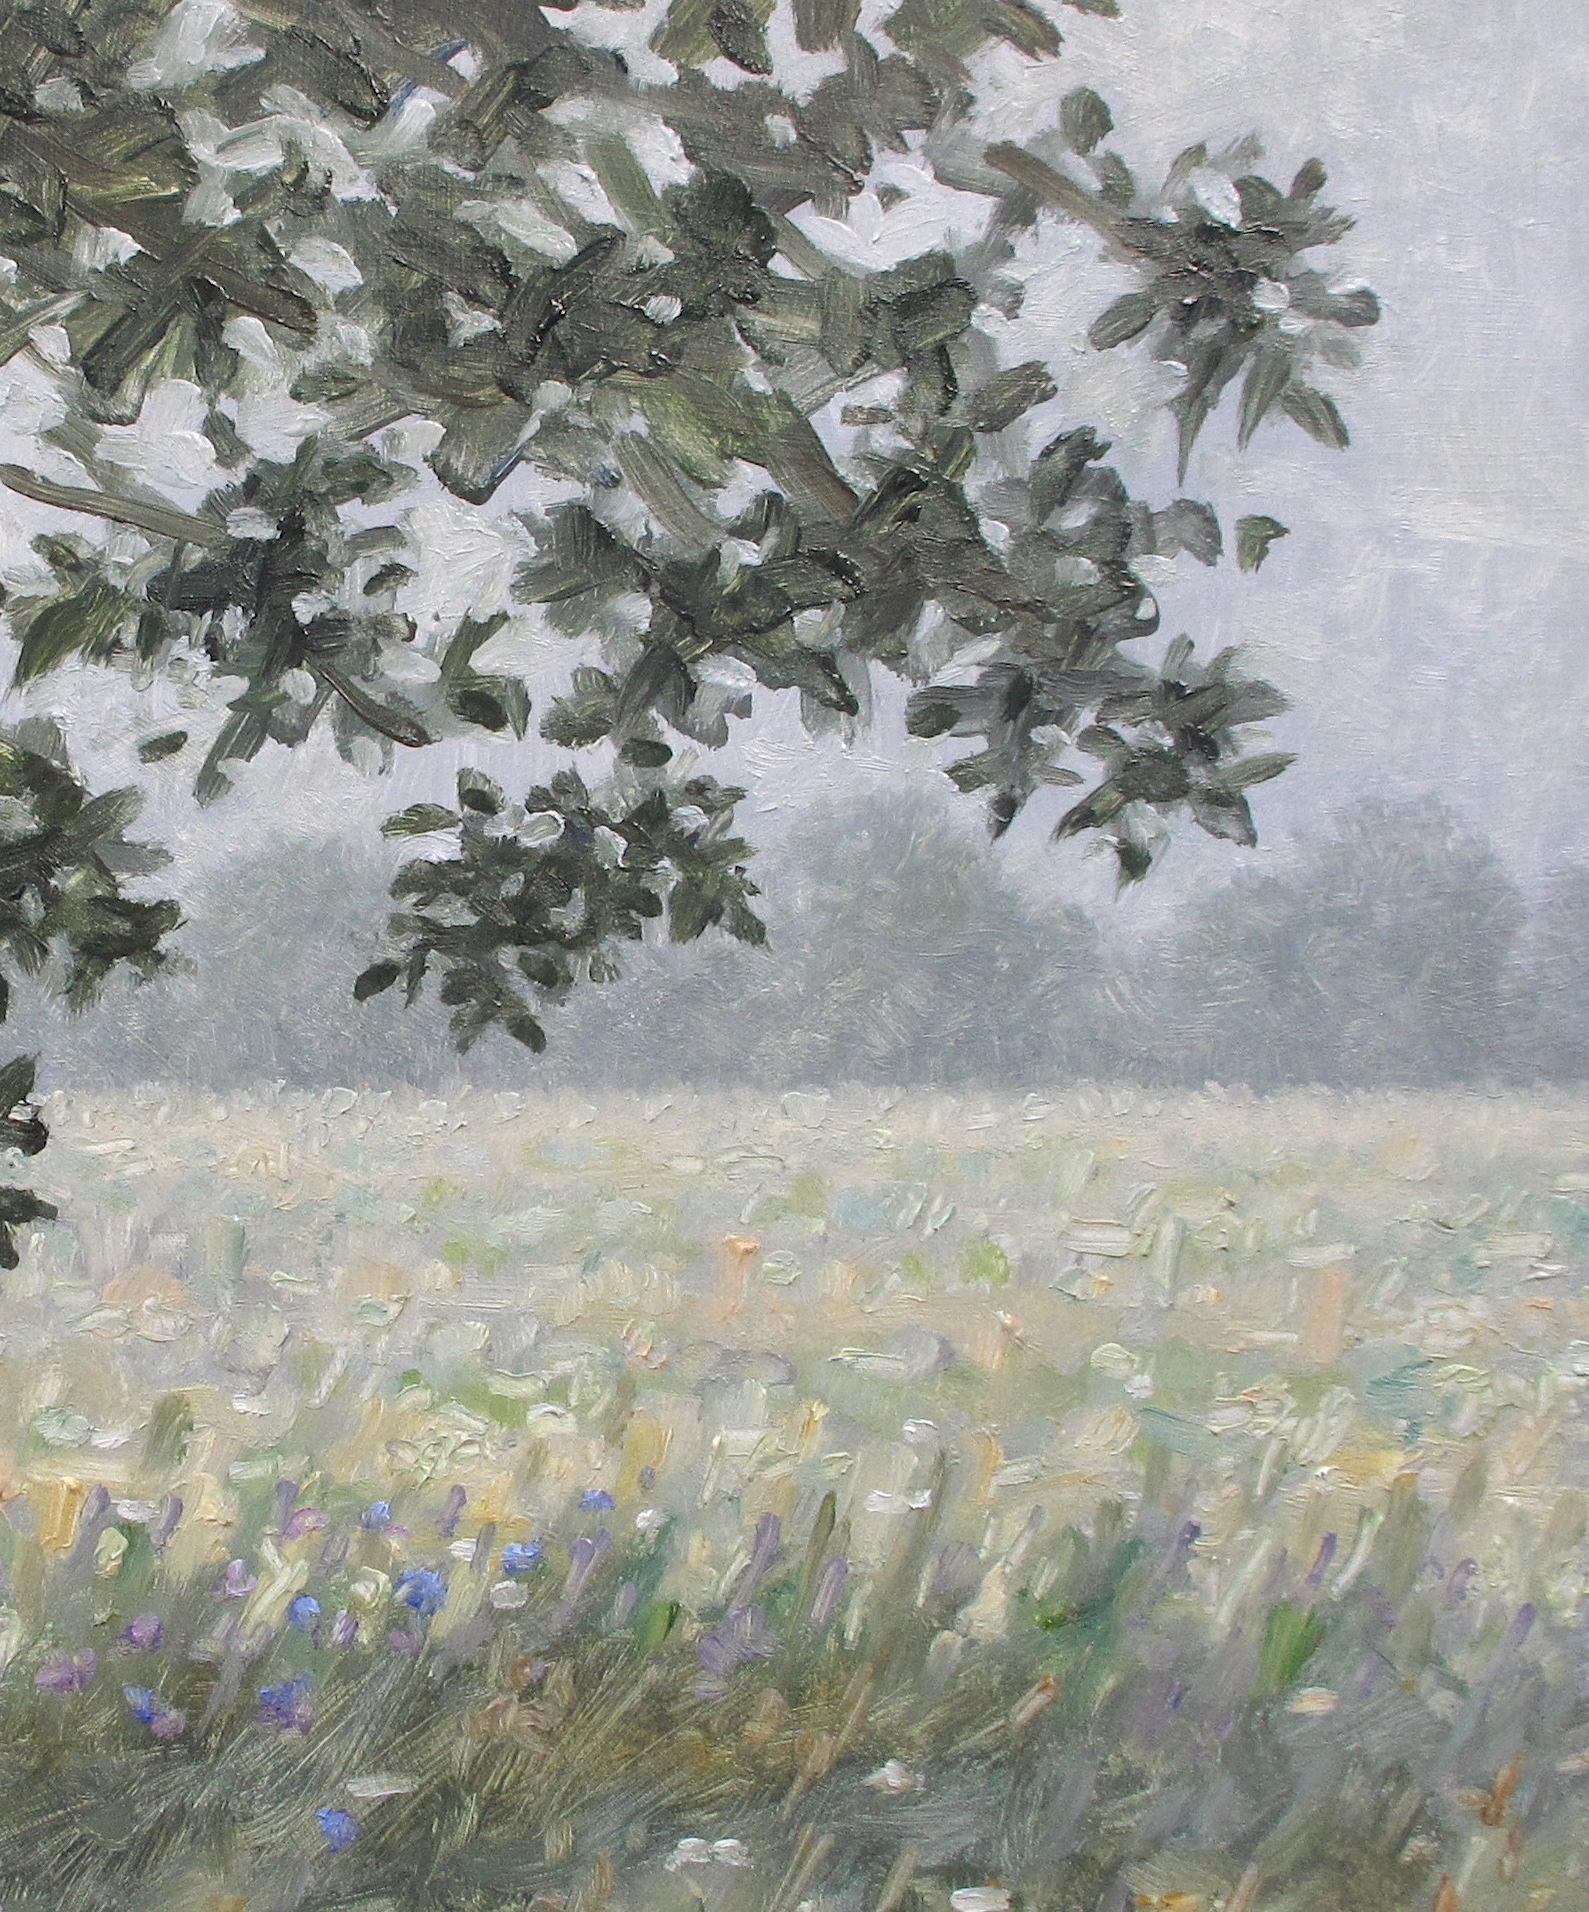 A peaceful outdoor scene of a delicately painted field with white and pale lilac flowers, shrouded in mist, beneath a tree with olive green leaves, beautifully capturing the idyllic feel of a field of wildflowers and tall grass in mid-August.